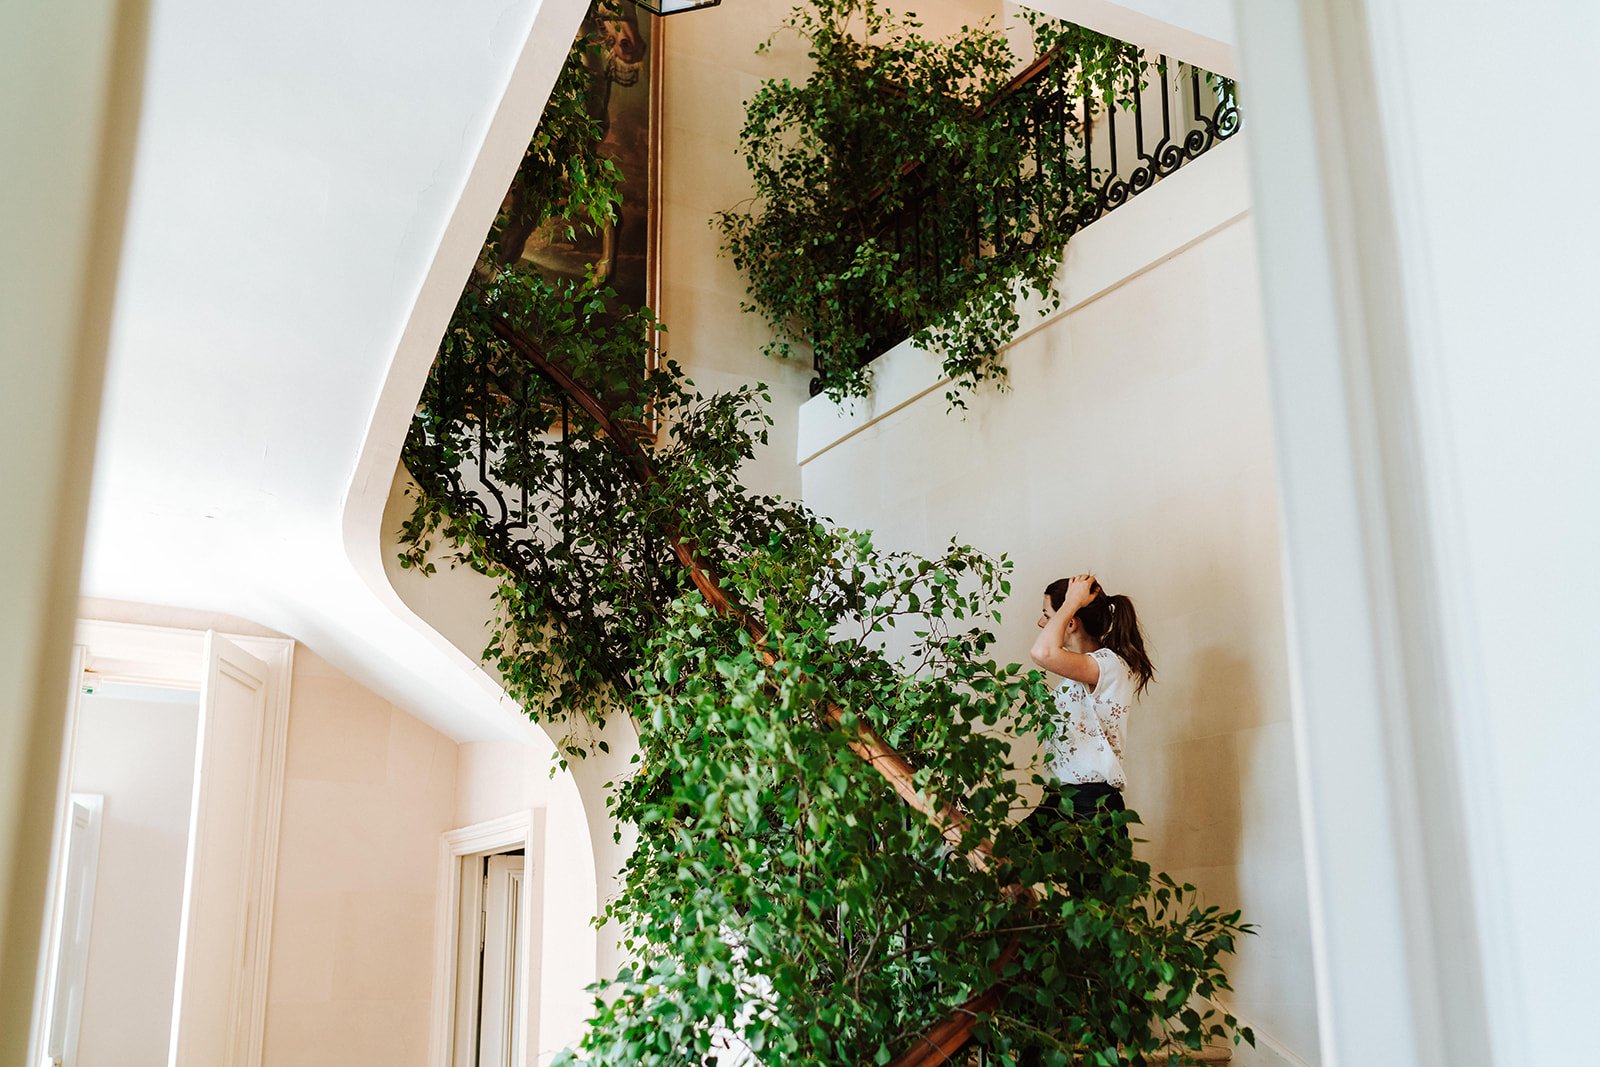 A woman on the staircase with lots of green plants decorating the railings at Chateau de Courtomer, a chateau in France.